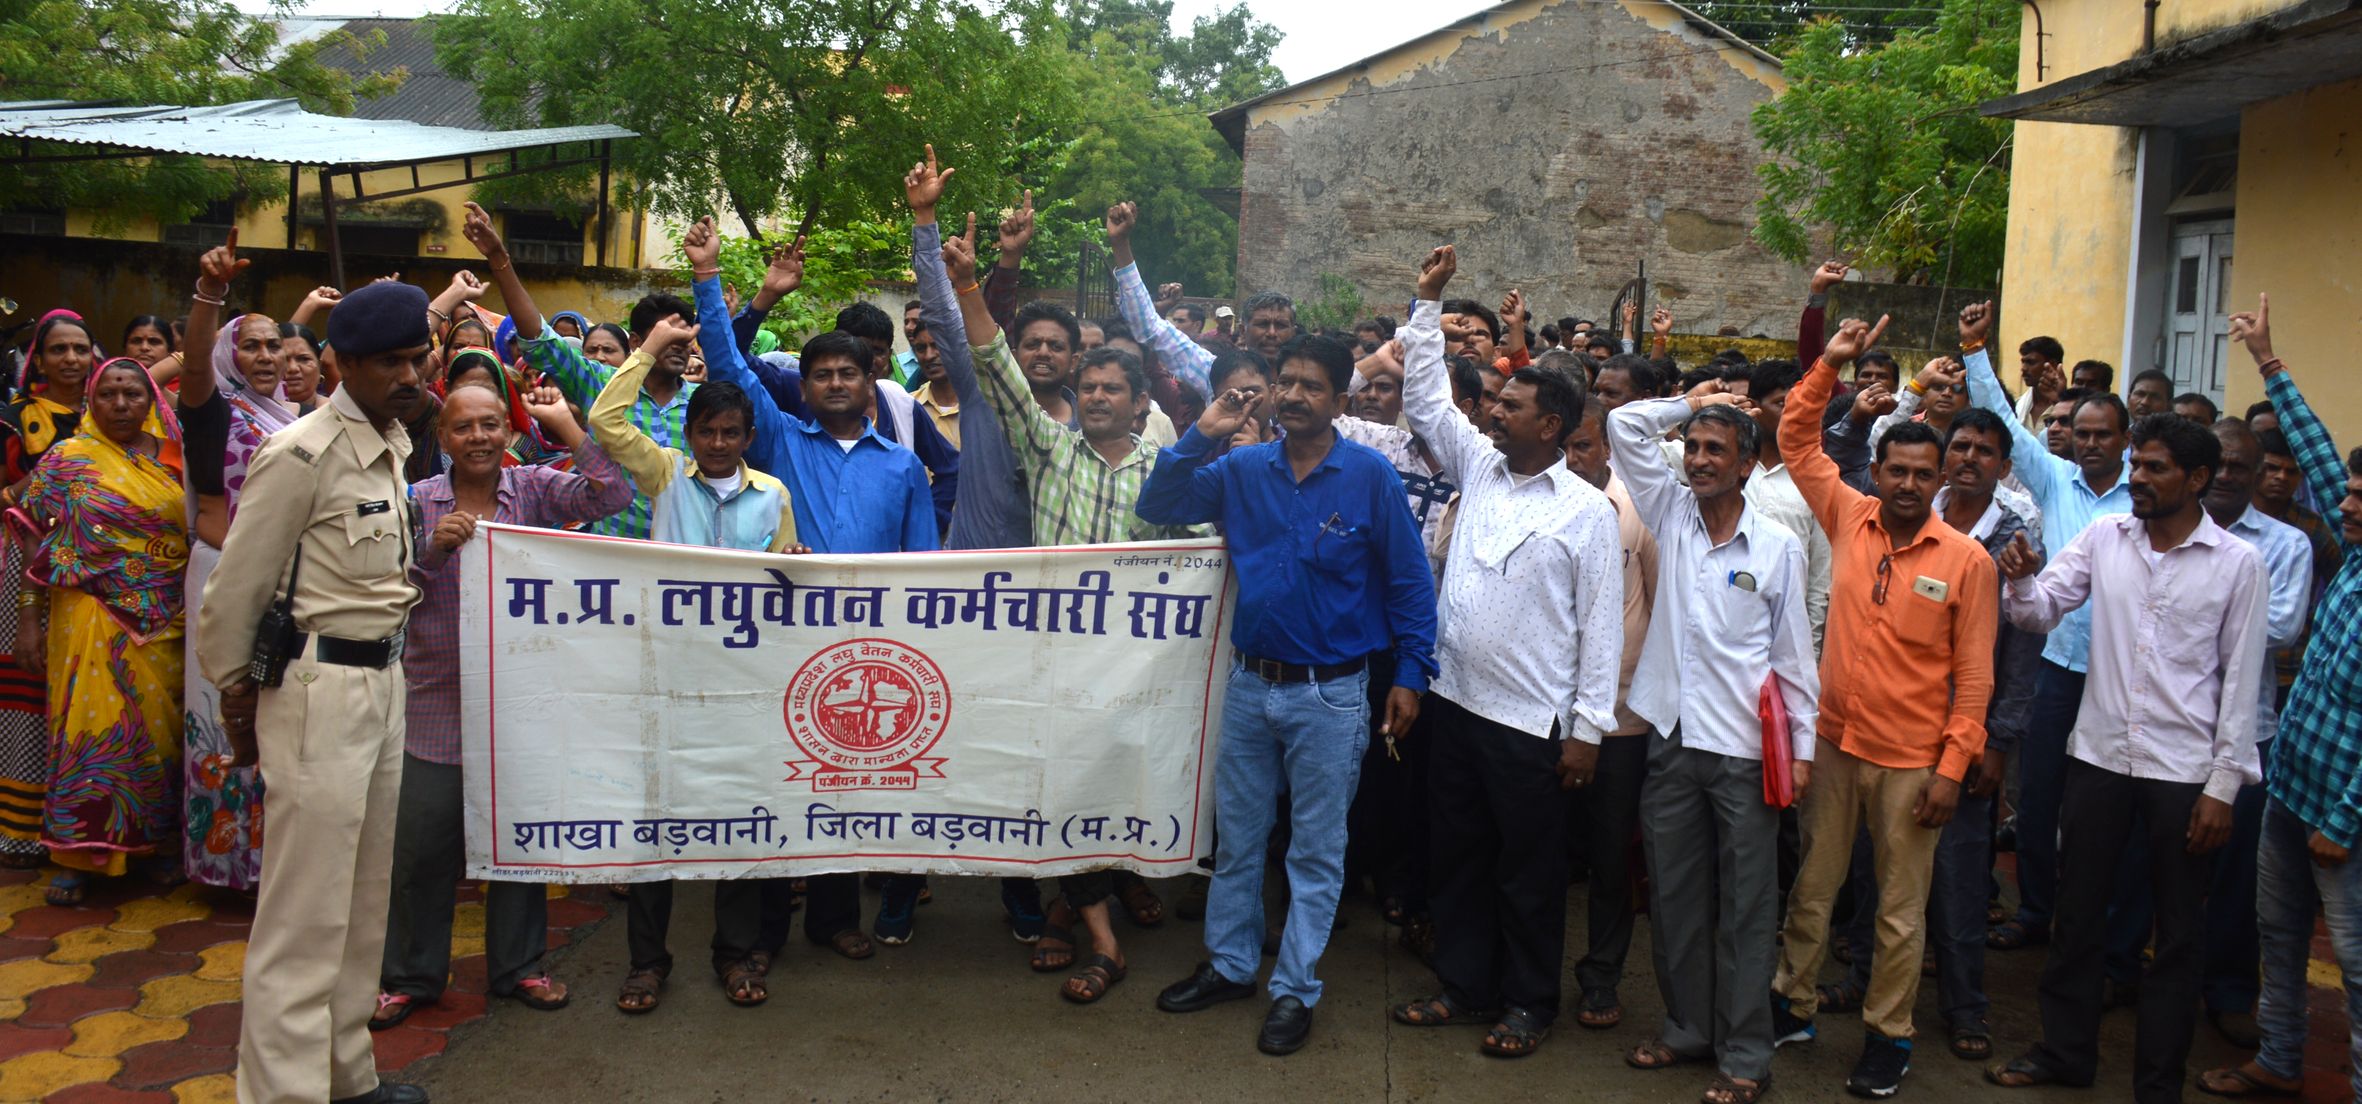 Small scale employees association